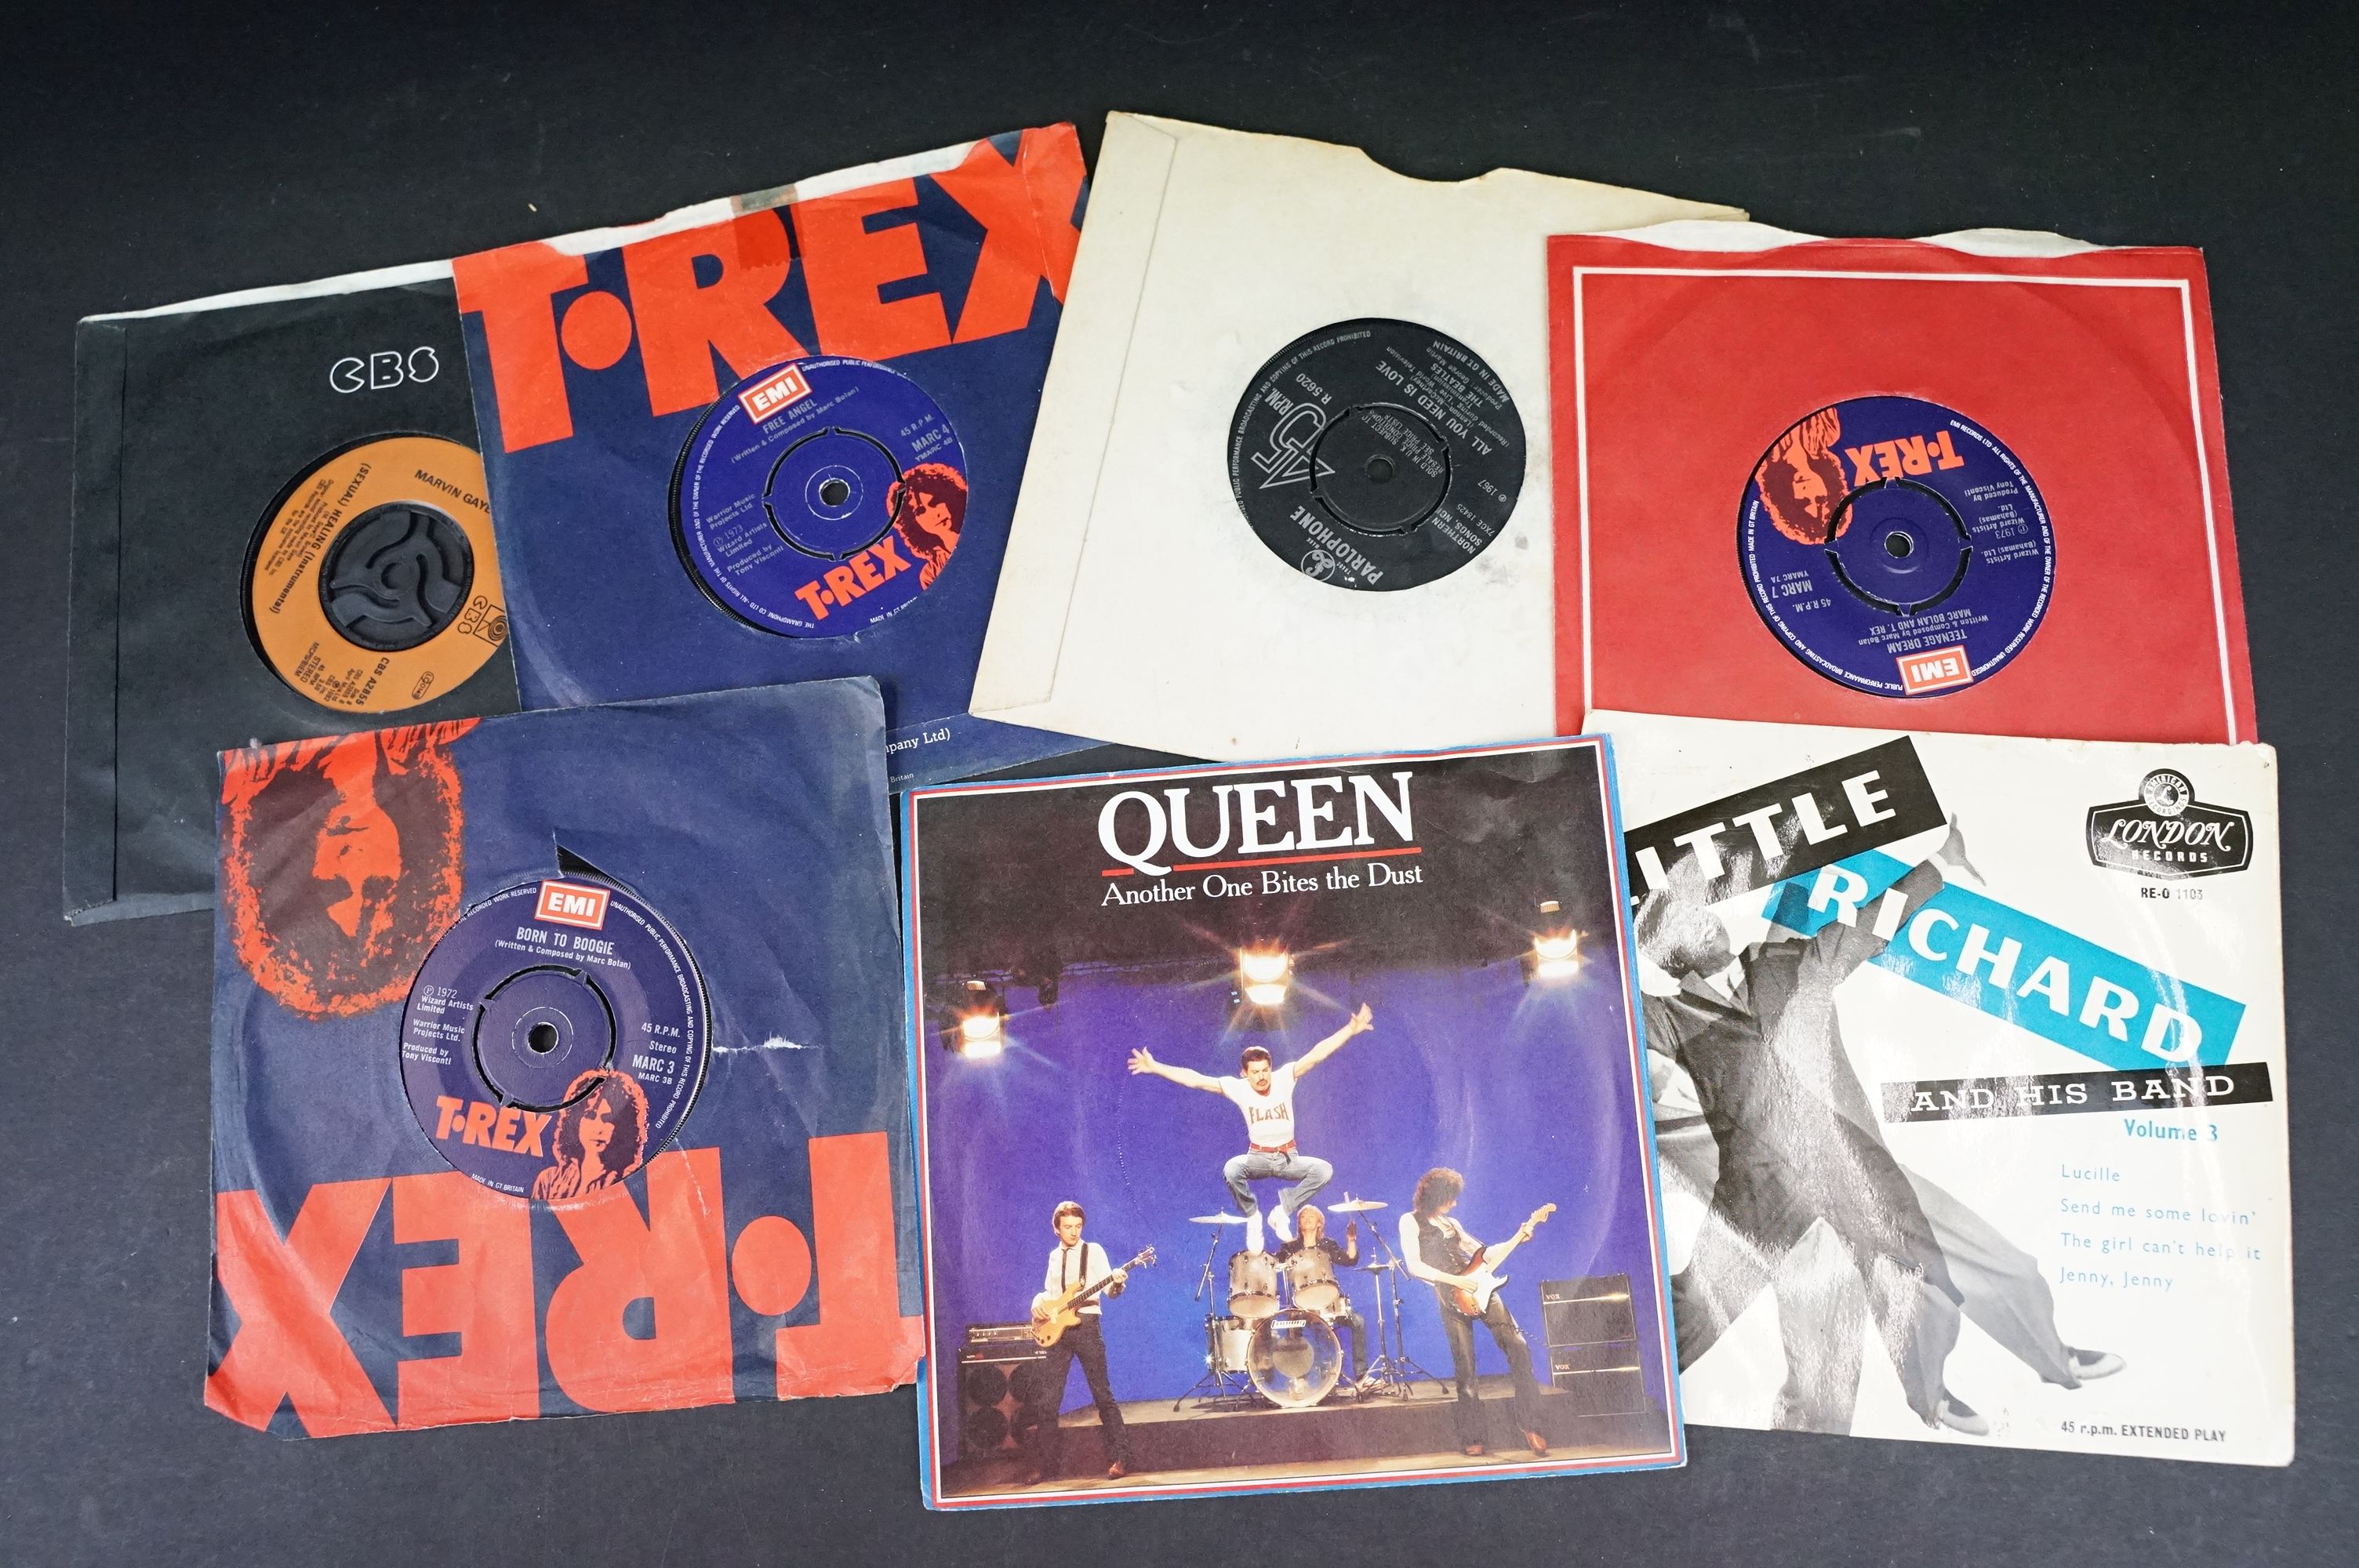 Vinyl - Over 300 mainly 1970s & 80s 7" singles to include The Beatles, Little Richard, T-Rex, Queen, - Image 3 of 4